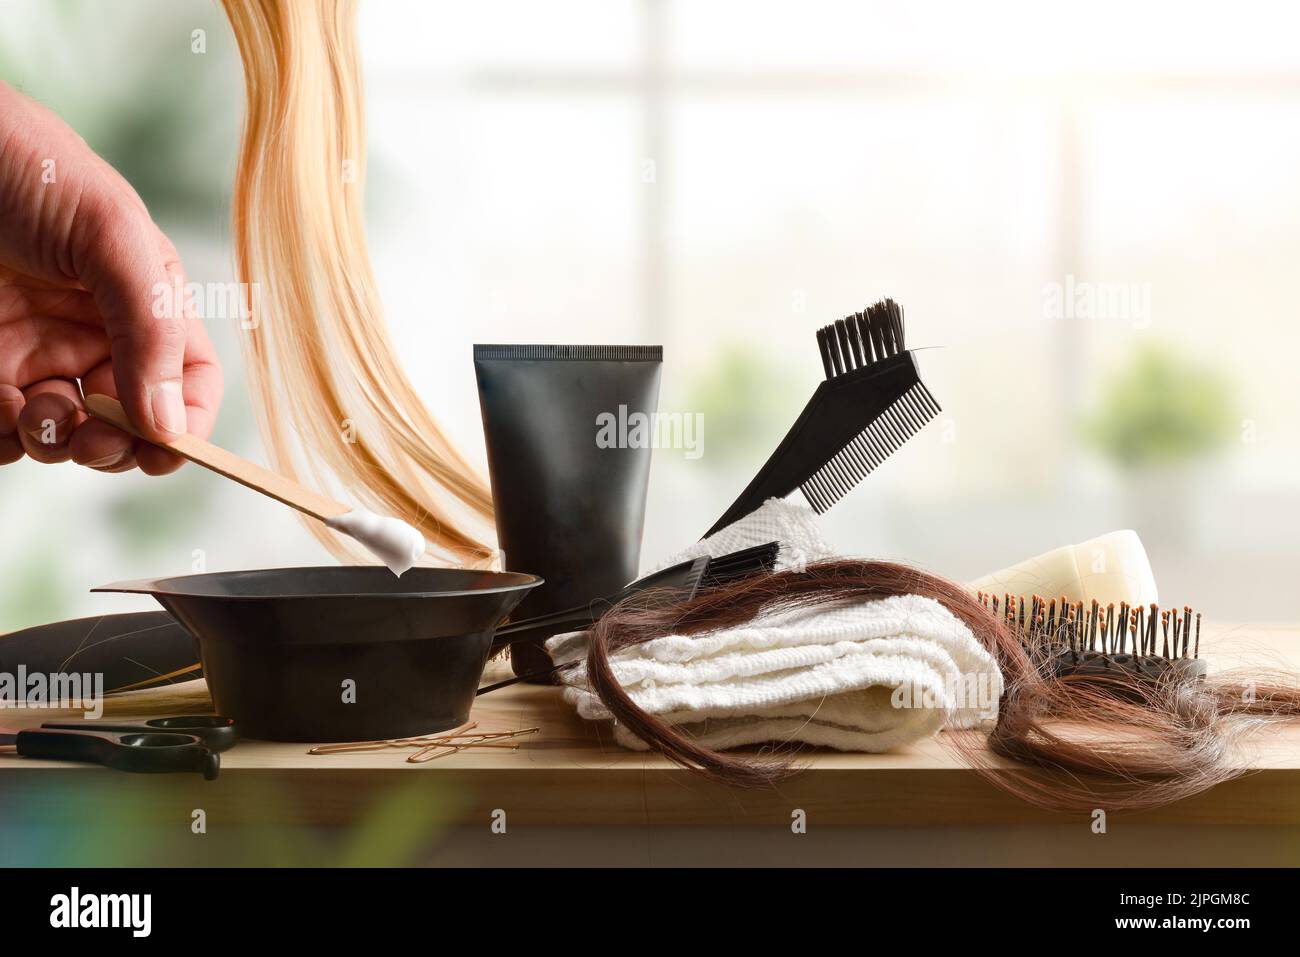 Set of hair treatment products on wooden table at home. Front view. Horizontal composition. Stock Photo